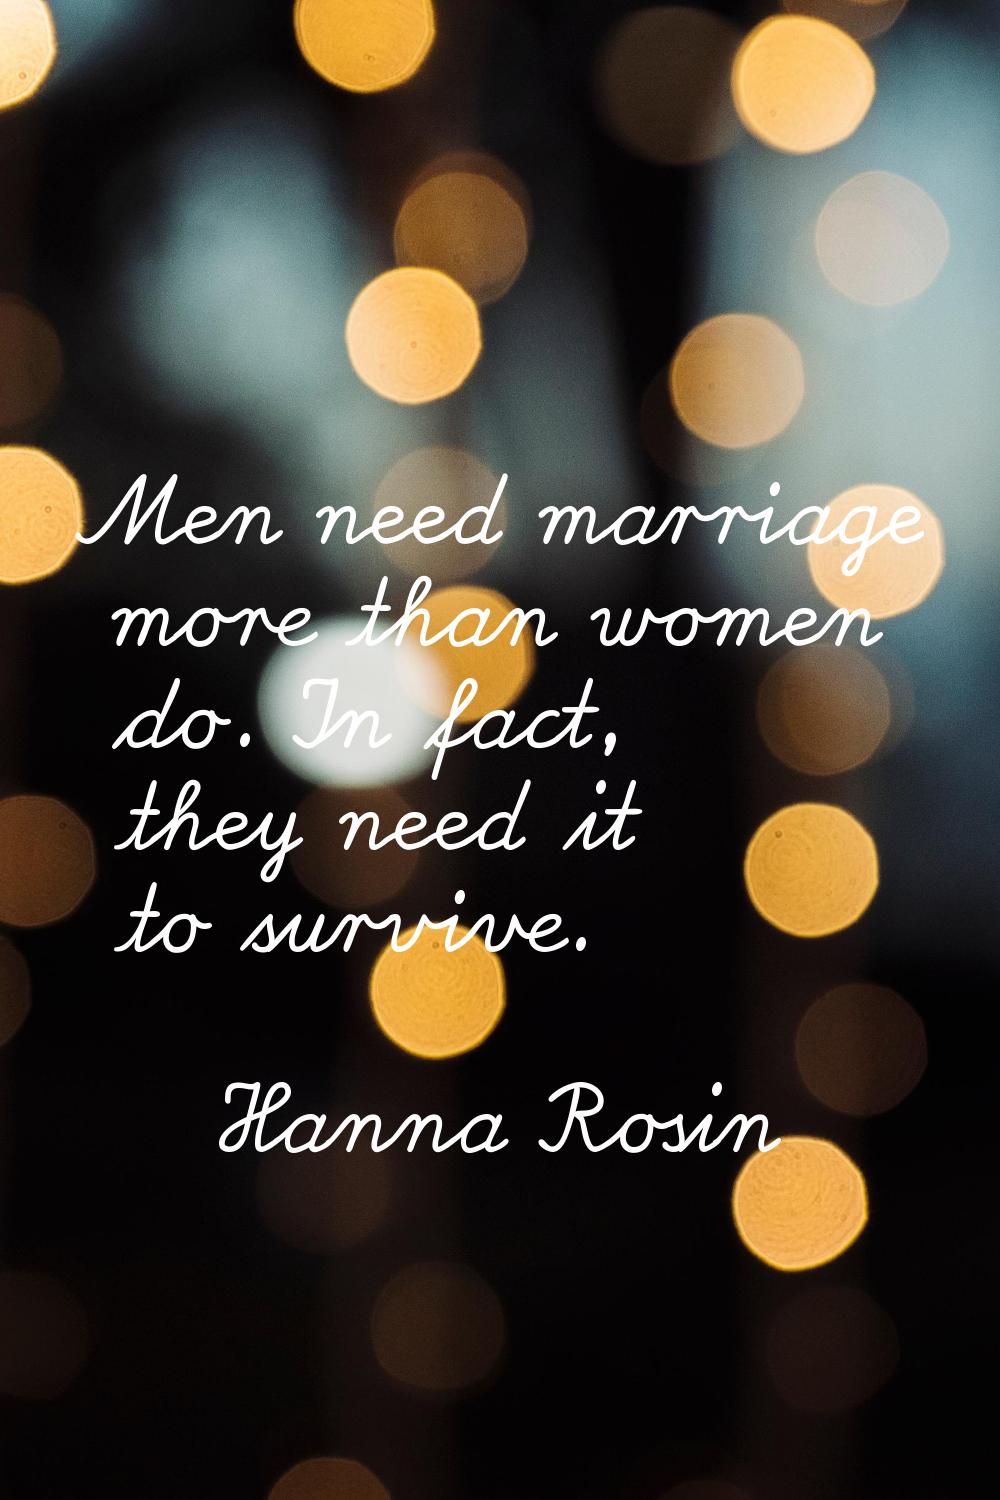 Men need marriage more than women do. In fact, they need it to survive.